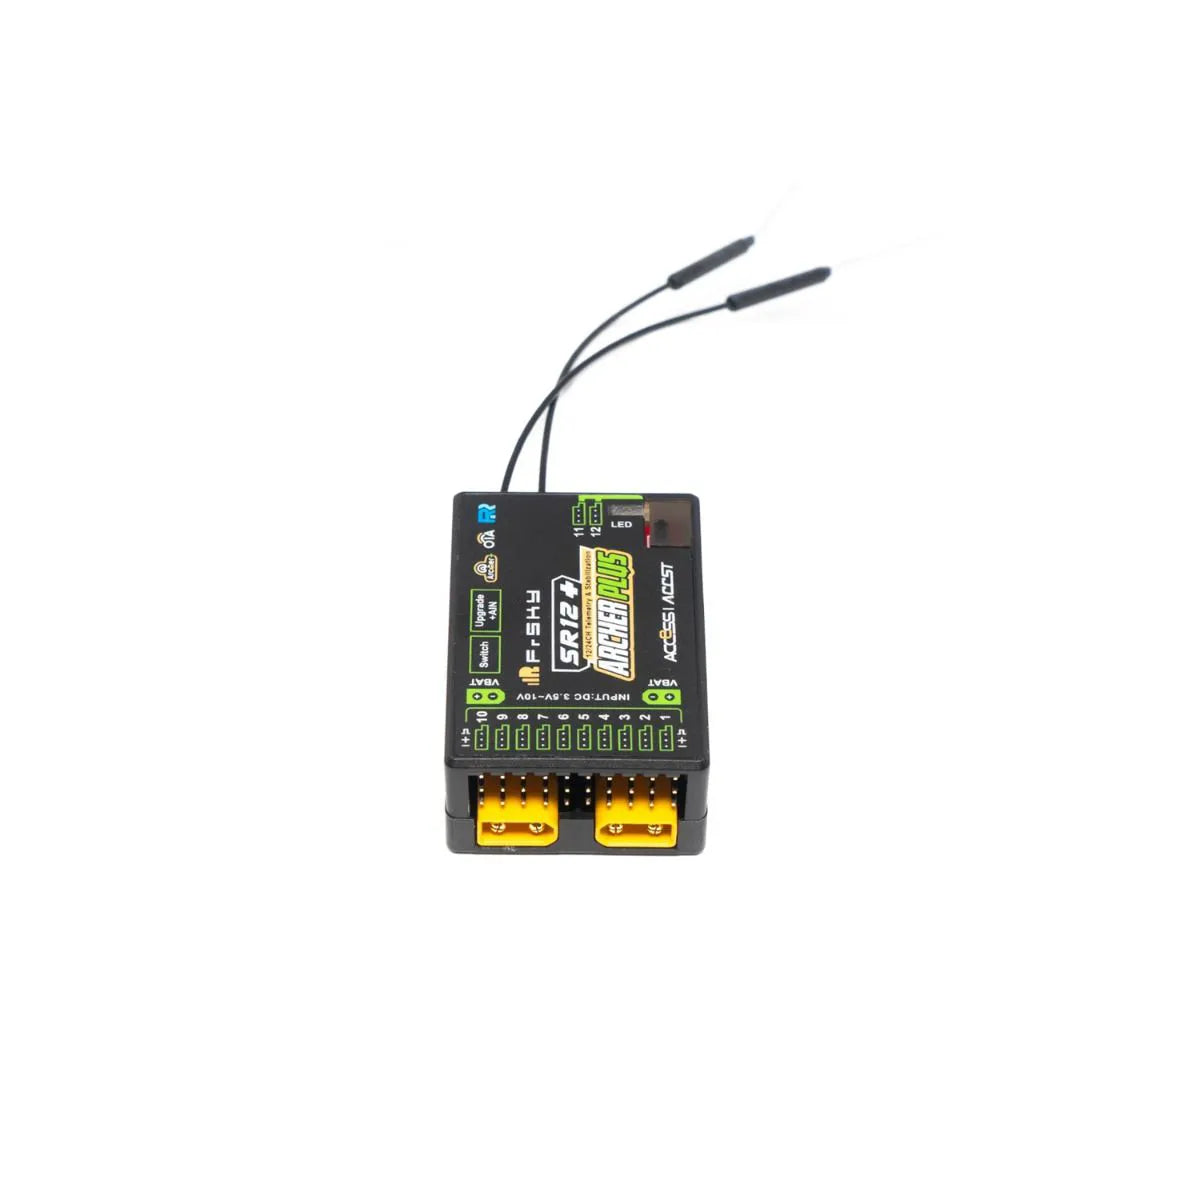 FrSky ARCHER PLUS SR12+ Receiver - 2.4Ghz ACCESS ACCST D16 Mode Built-in 3-Axis Gyroscope 12 Channel Receiver